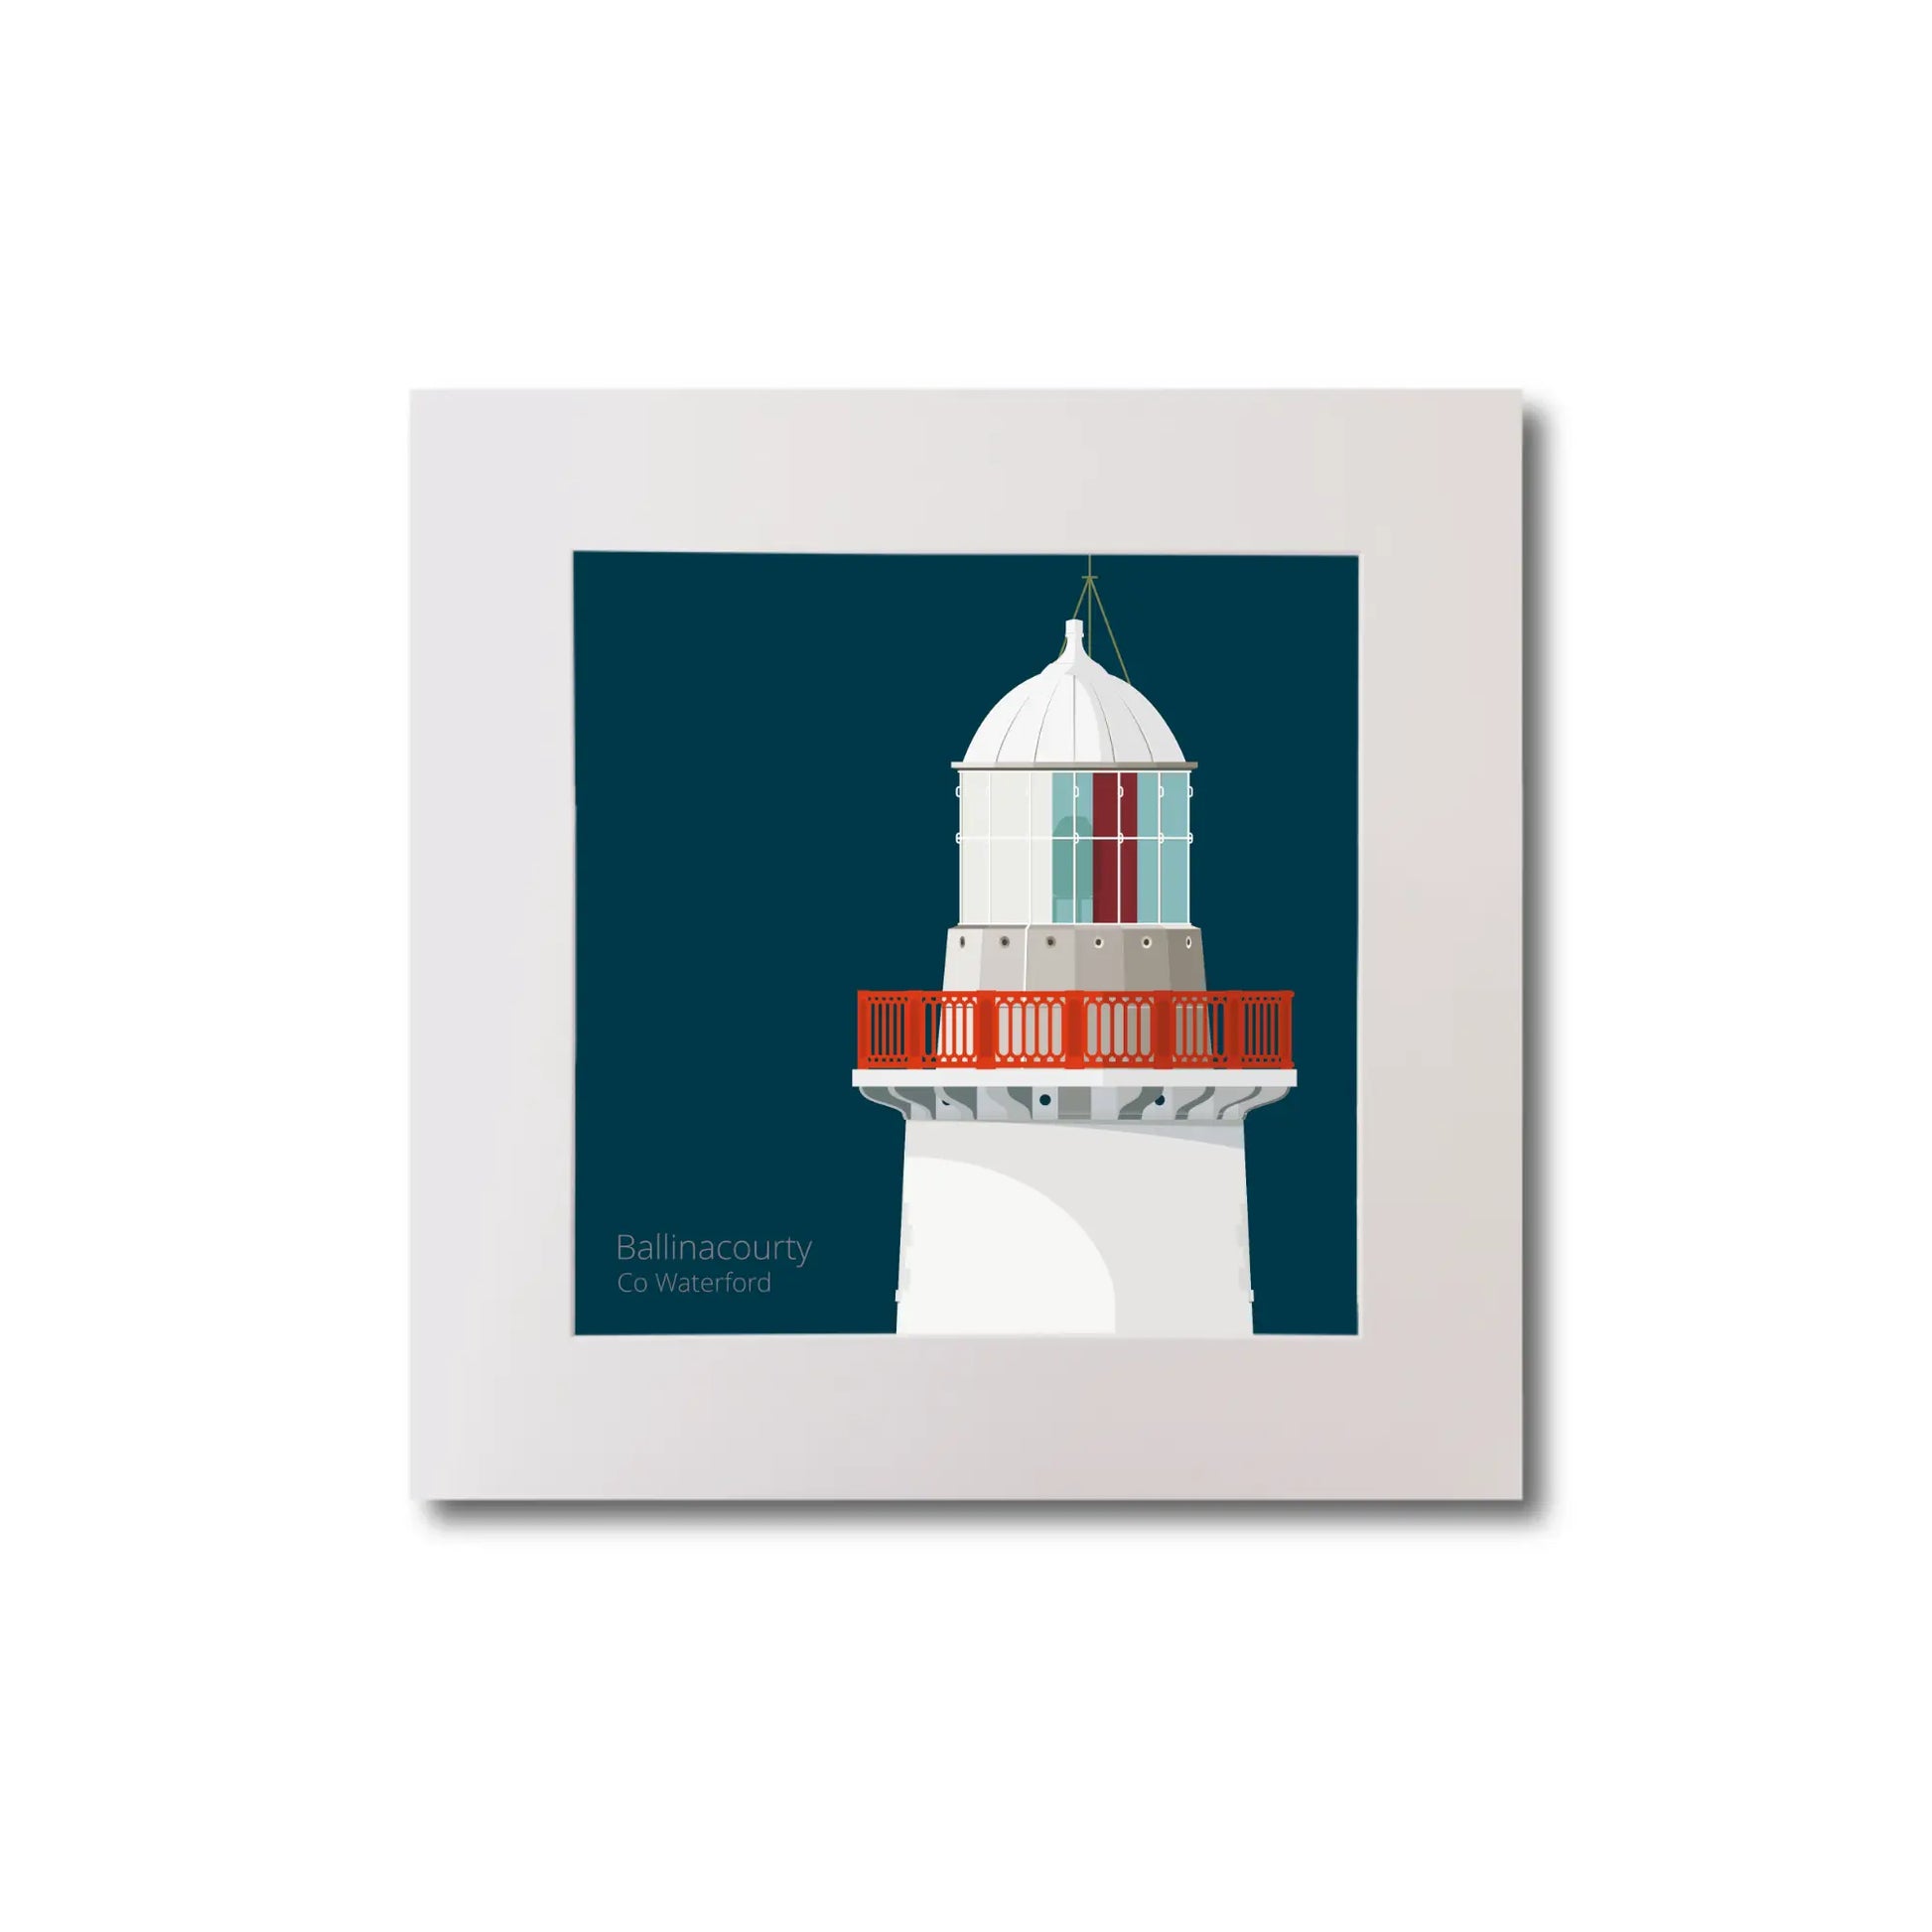 Illustration of Ballinacourty lighthouse on a midnight blue background, mounted and measuring 20x20cm.